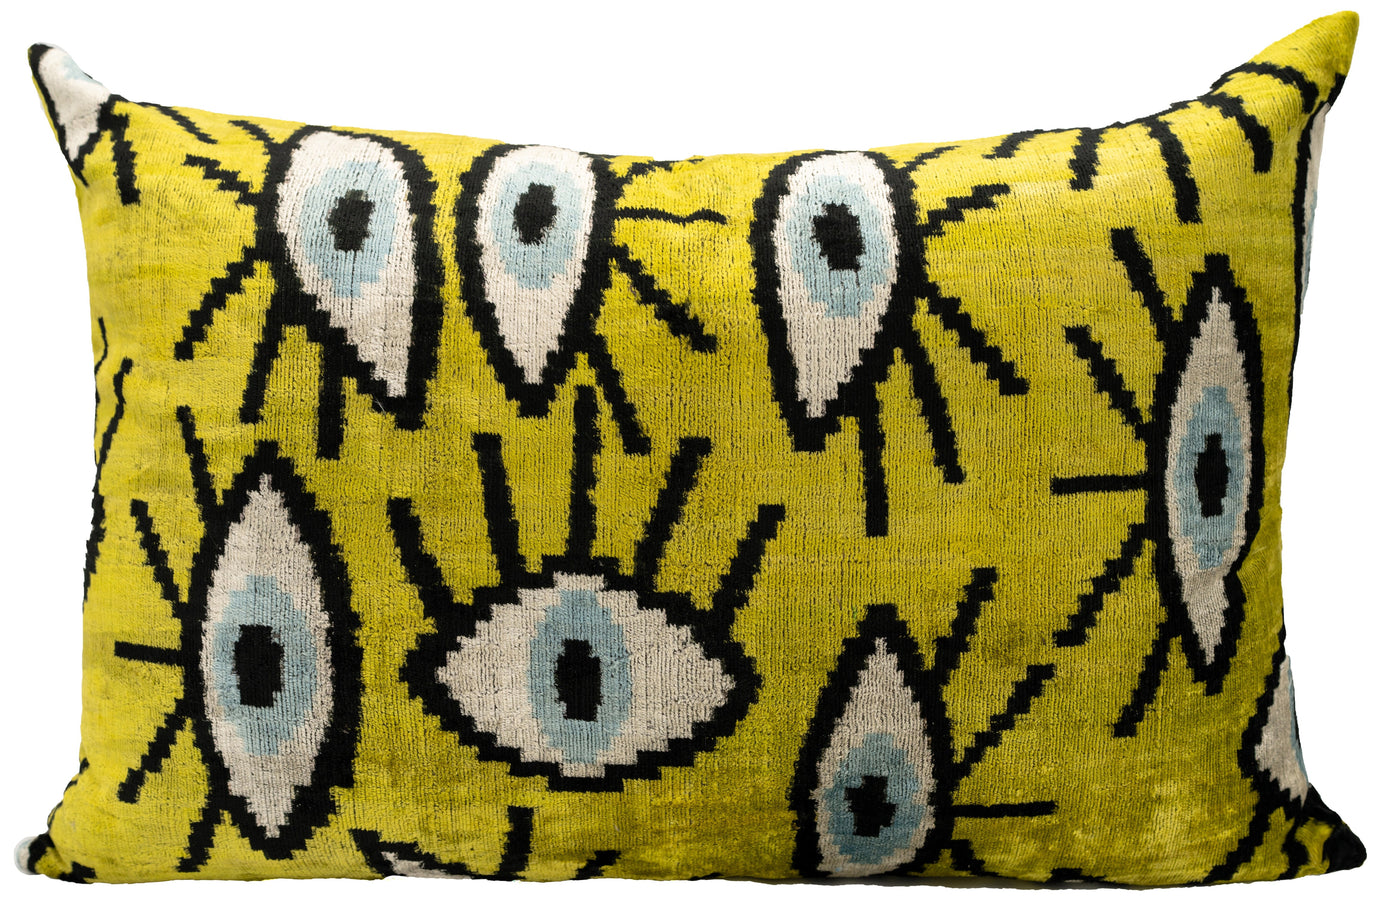 Handmade Yellowish Eye Design Throw Pillow - 16x24 inch, Vegetable Dyed with Premium Down Feather Insert